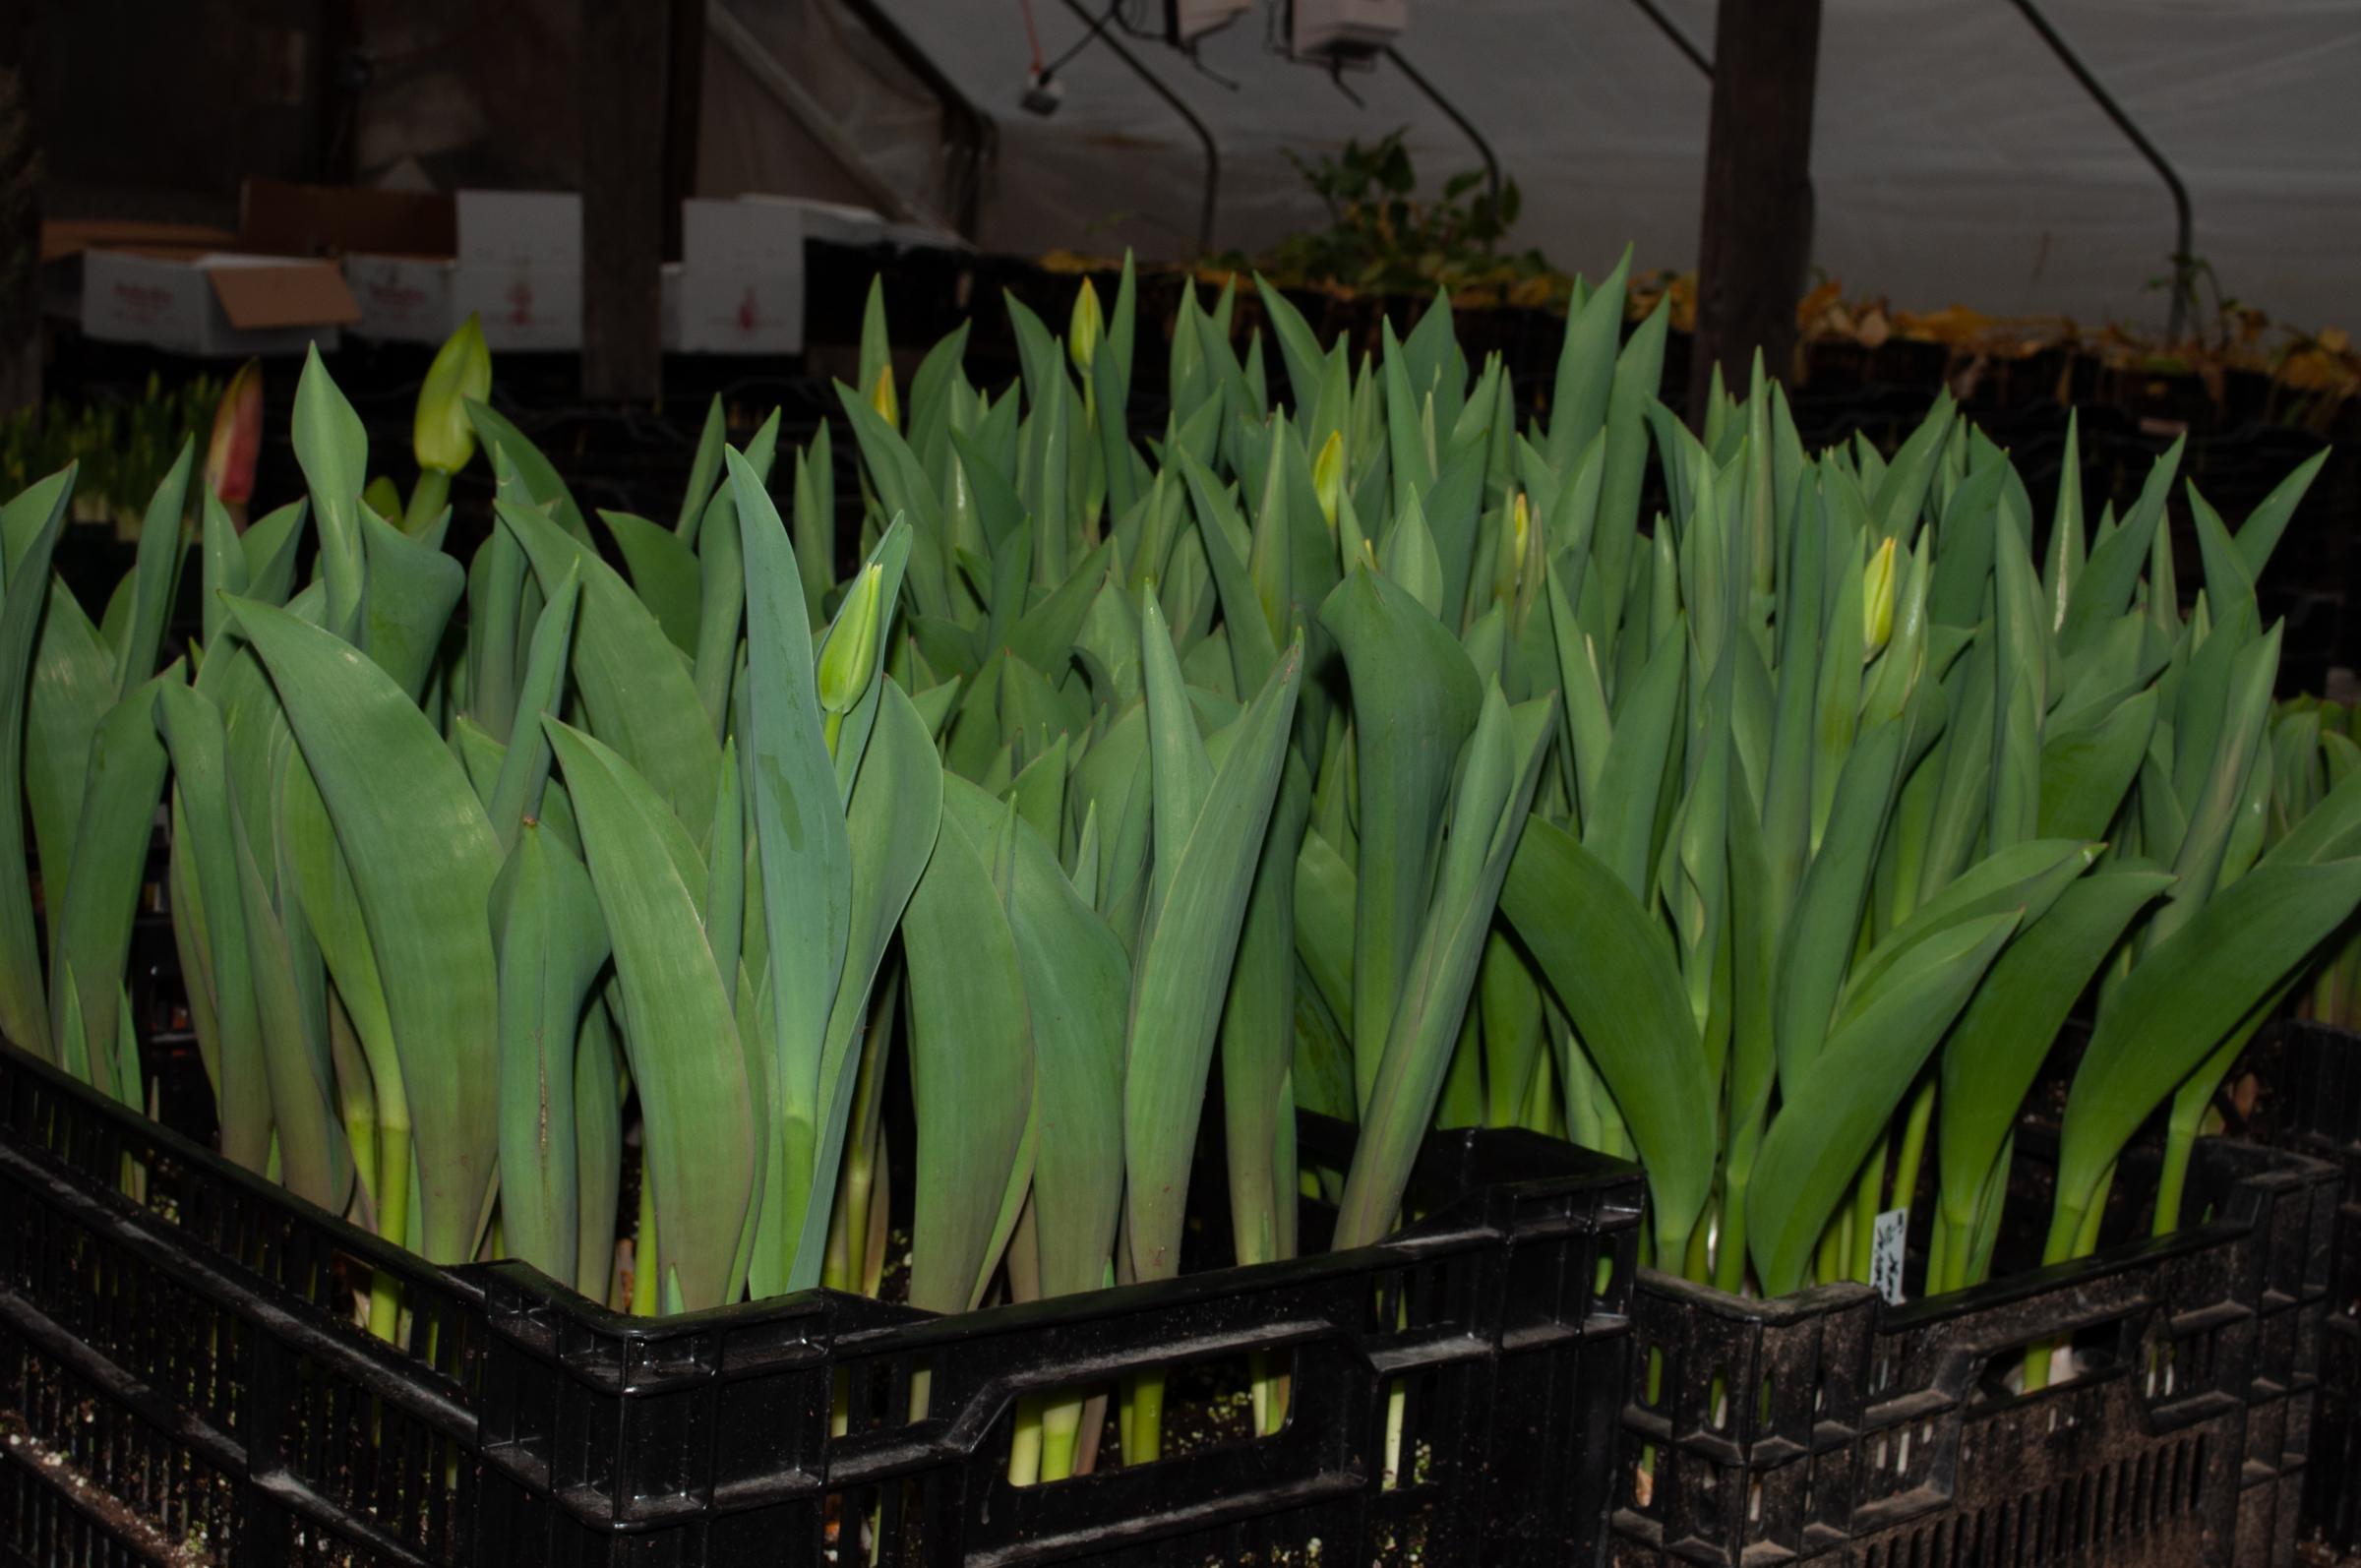 Tulips with buds in crates